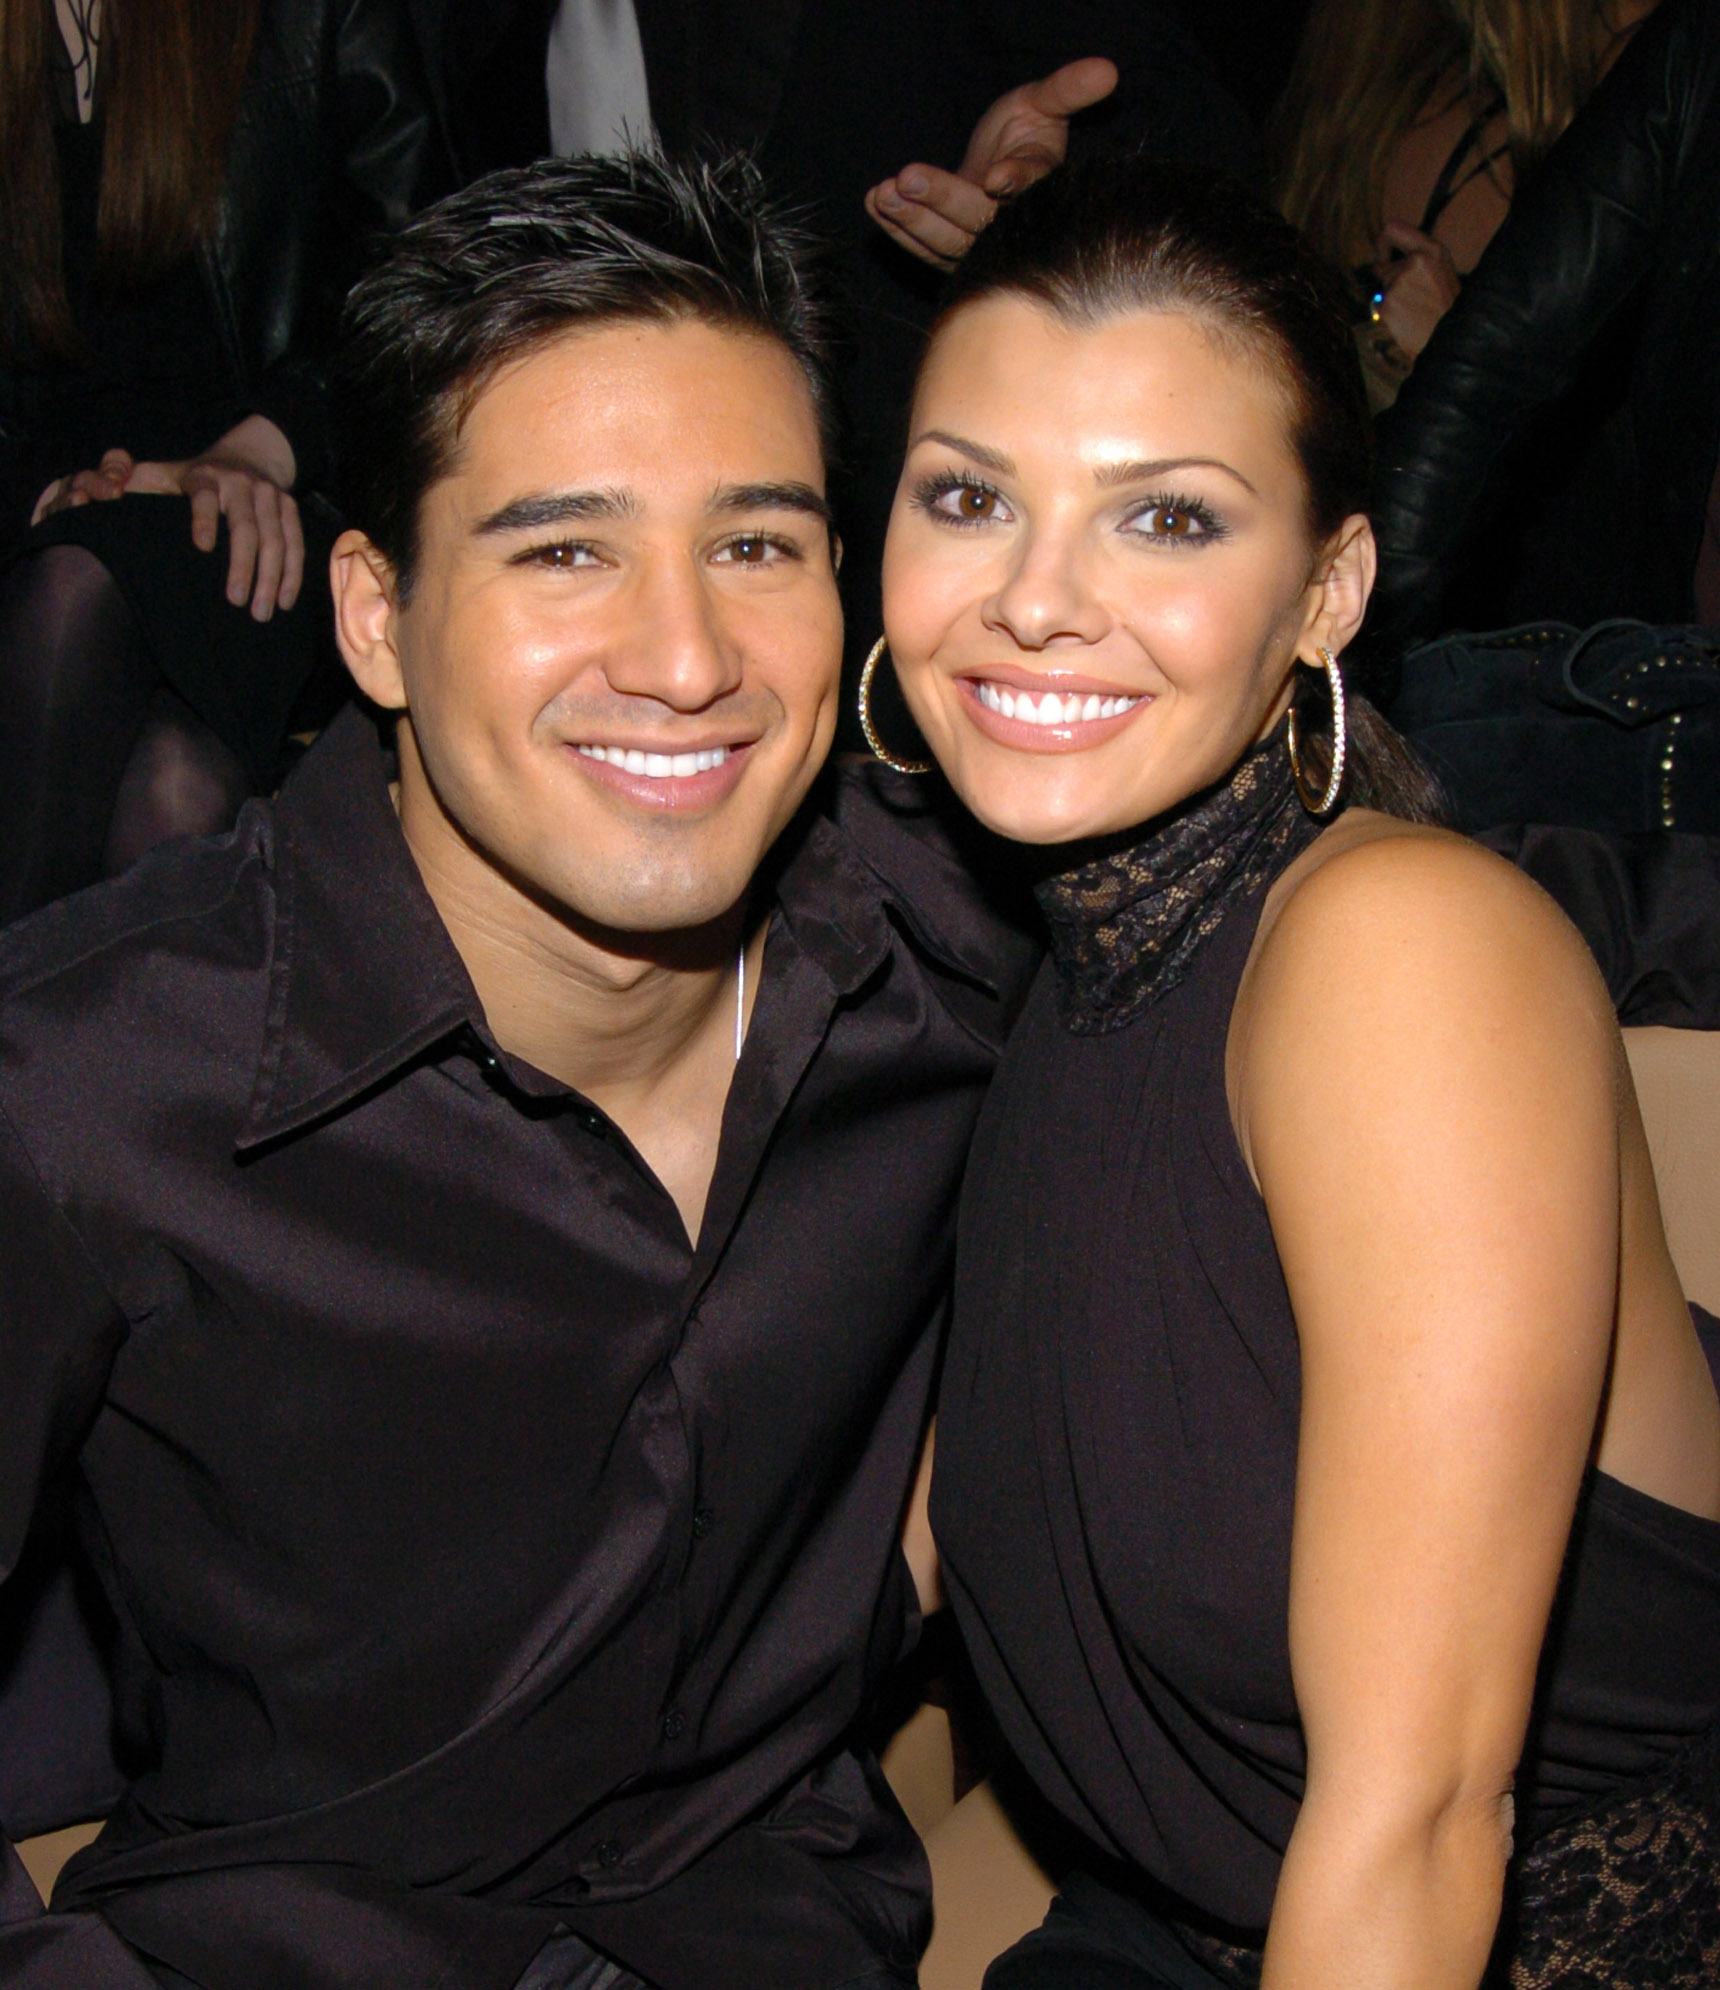 Mario Lopez and Ali Landry attend a launch party during their relationship 